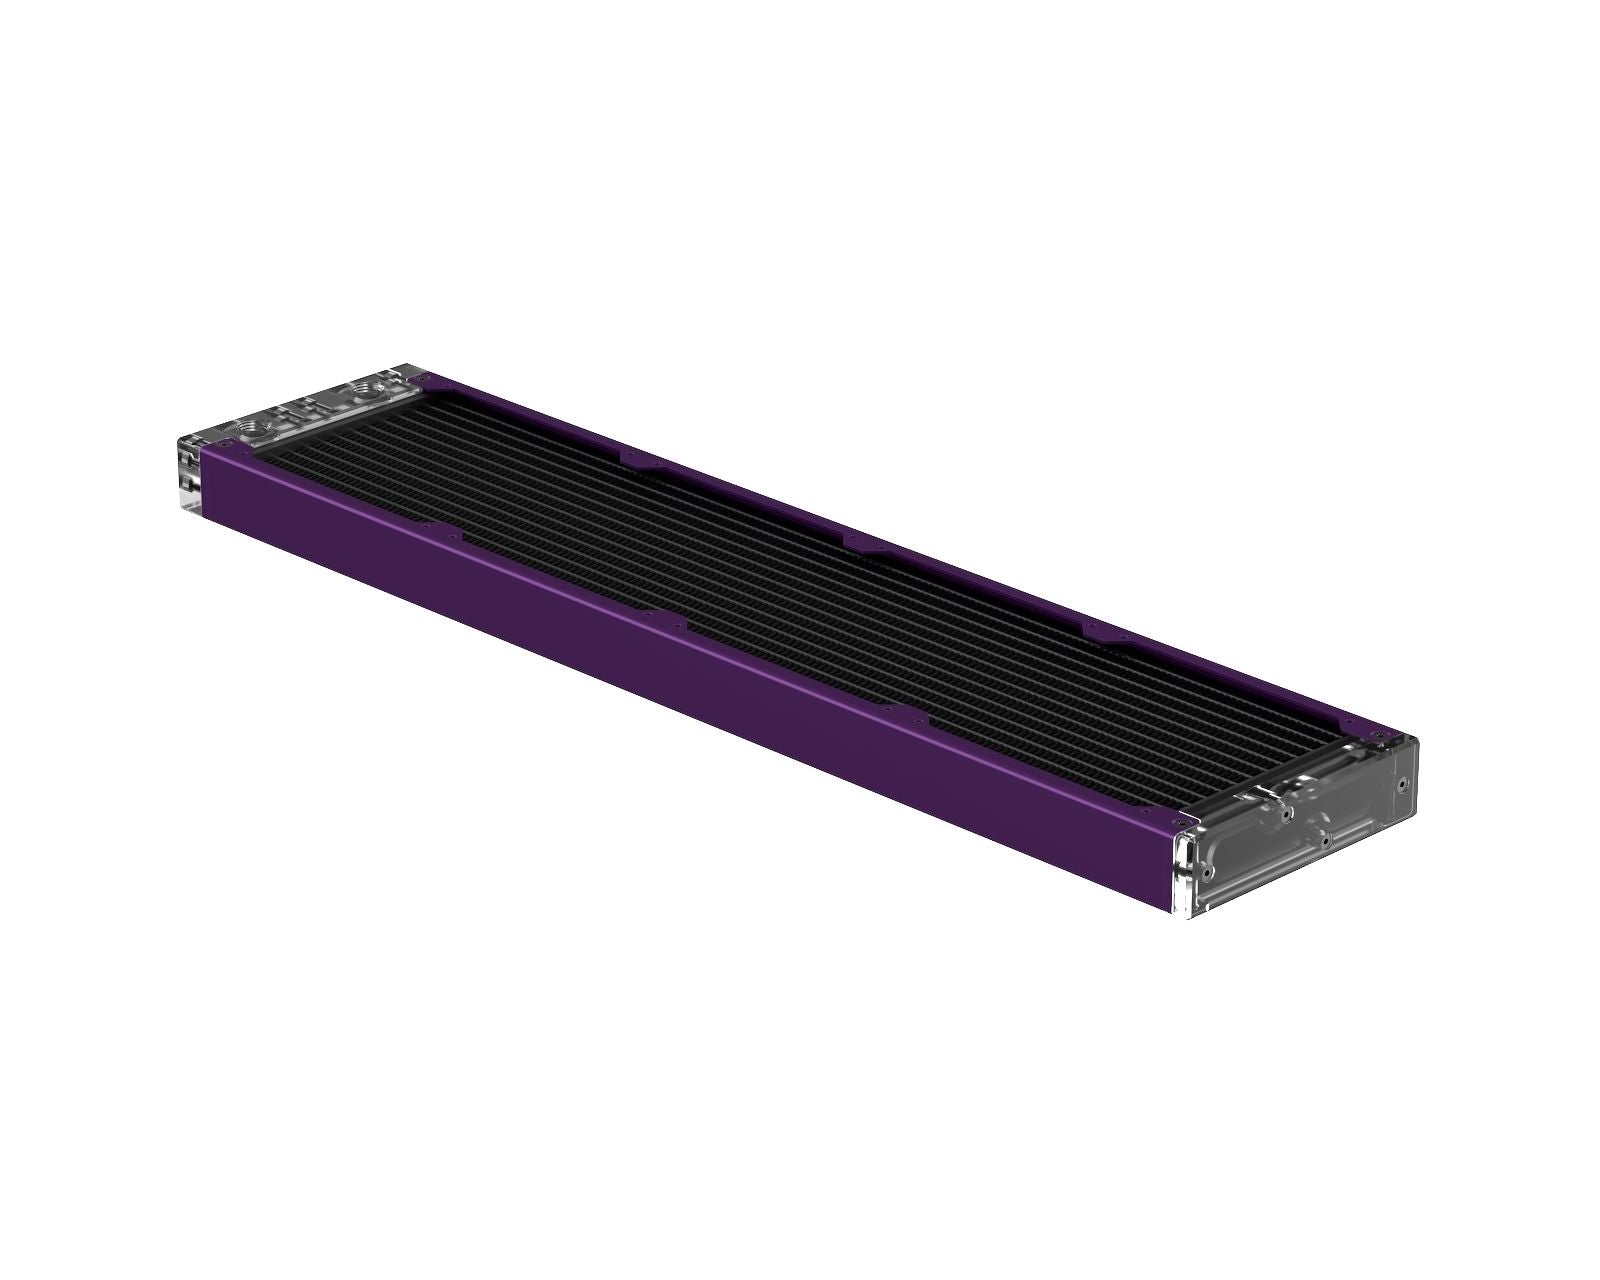 PrimoChill 480SL (30mm) EXIMO Modular Radiator, Clear Acrylic, 4x120mm, Quad Fan (R-SL-A48) Available in 20+ Colors, Assembled in USA and Custom Watercooling Loop Ready - Candy Purple